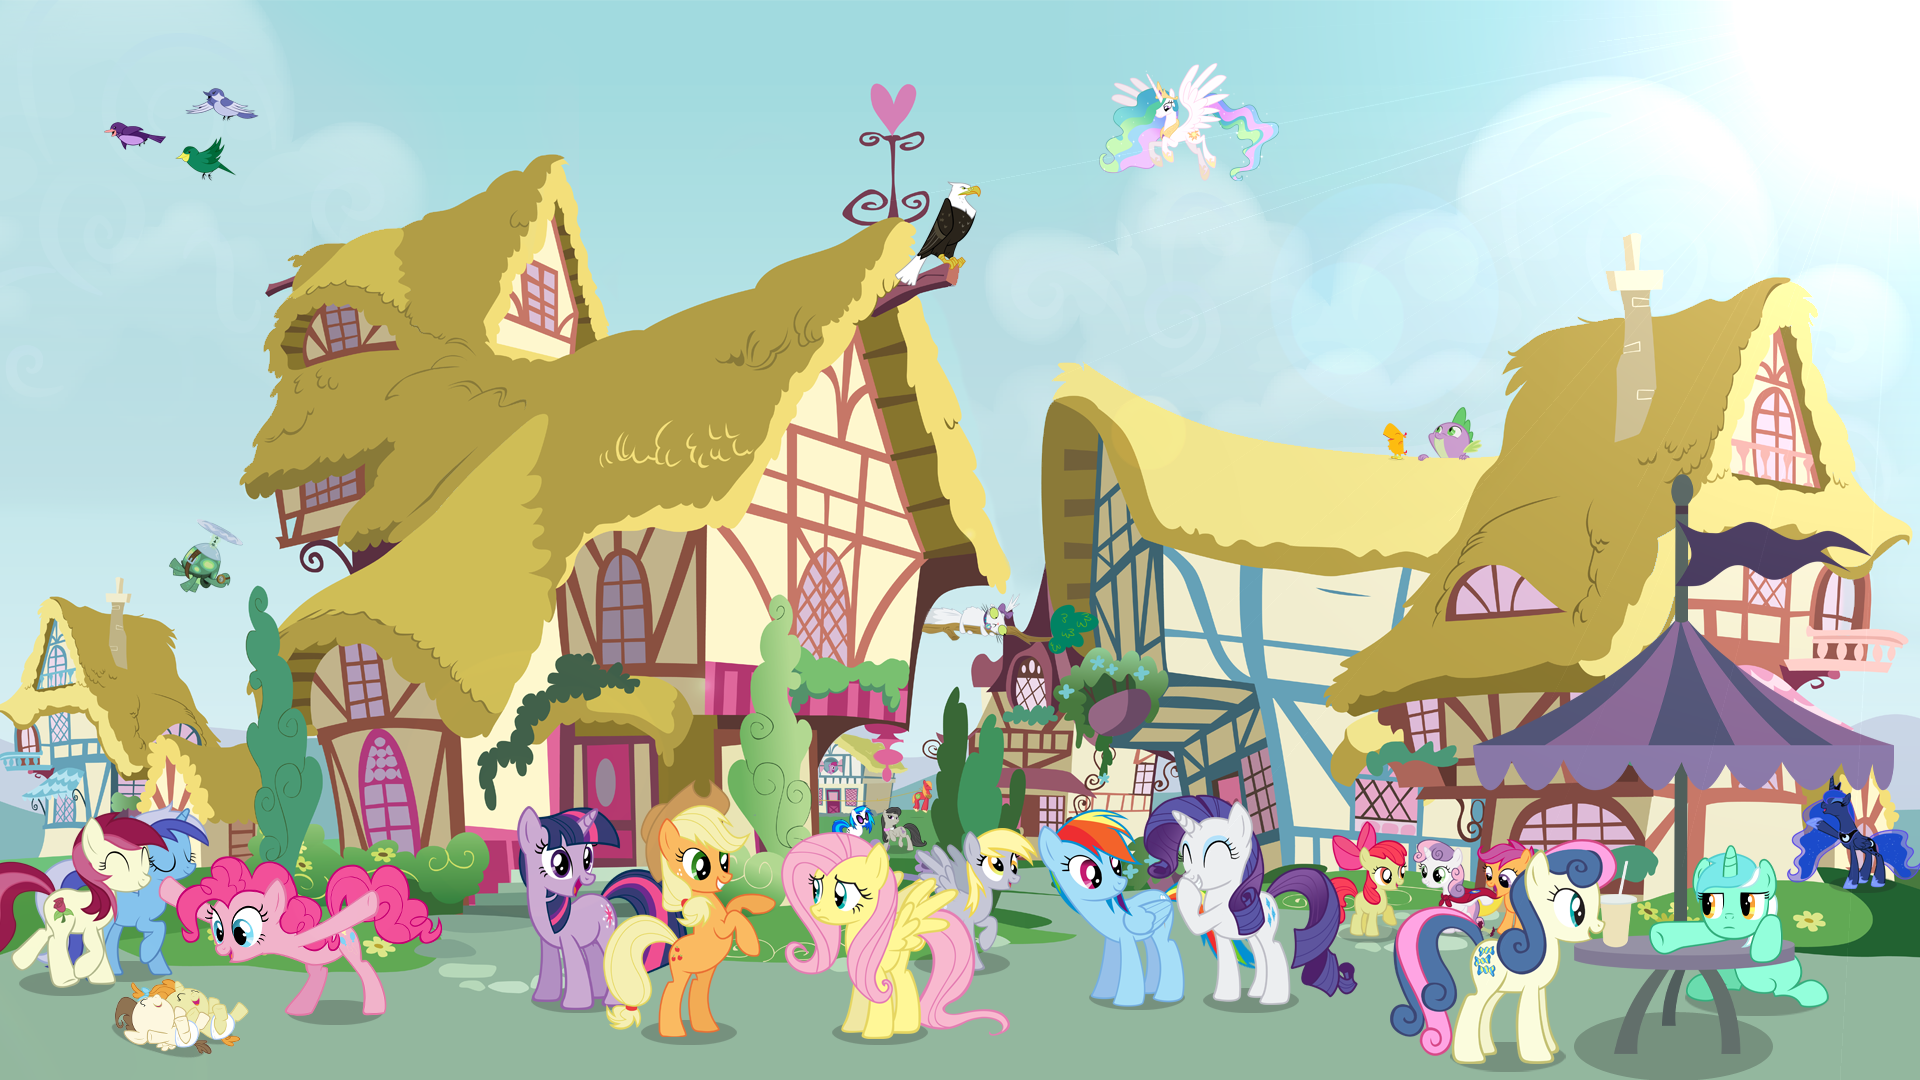 wallpaper___ponyville_by_mackaged-d4u0hhb.png